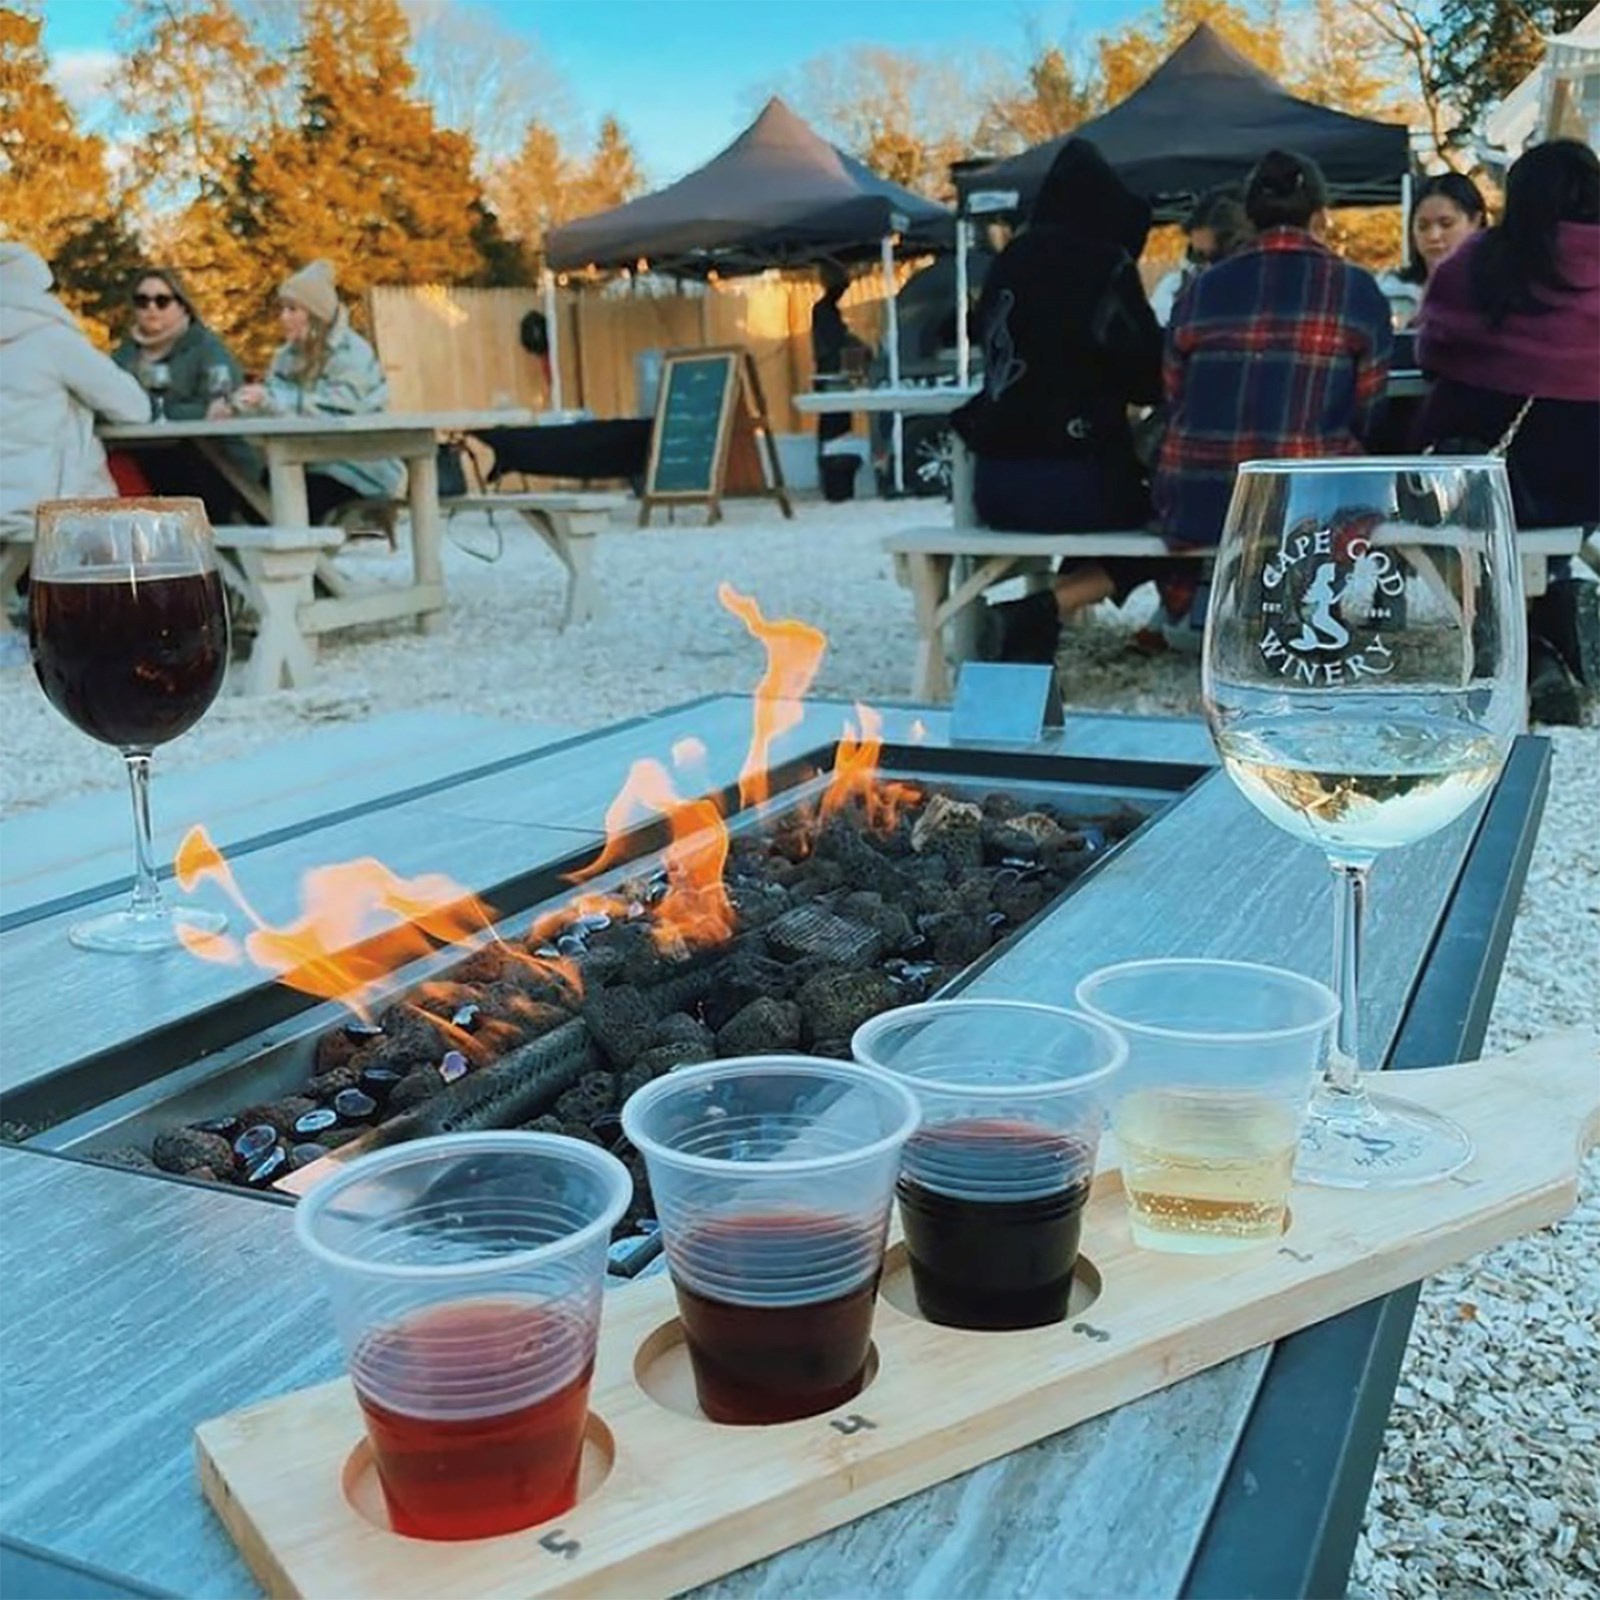 Sip On Some Vino At The Cape Cod Winery